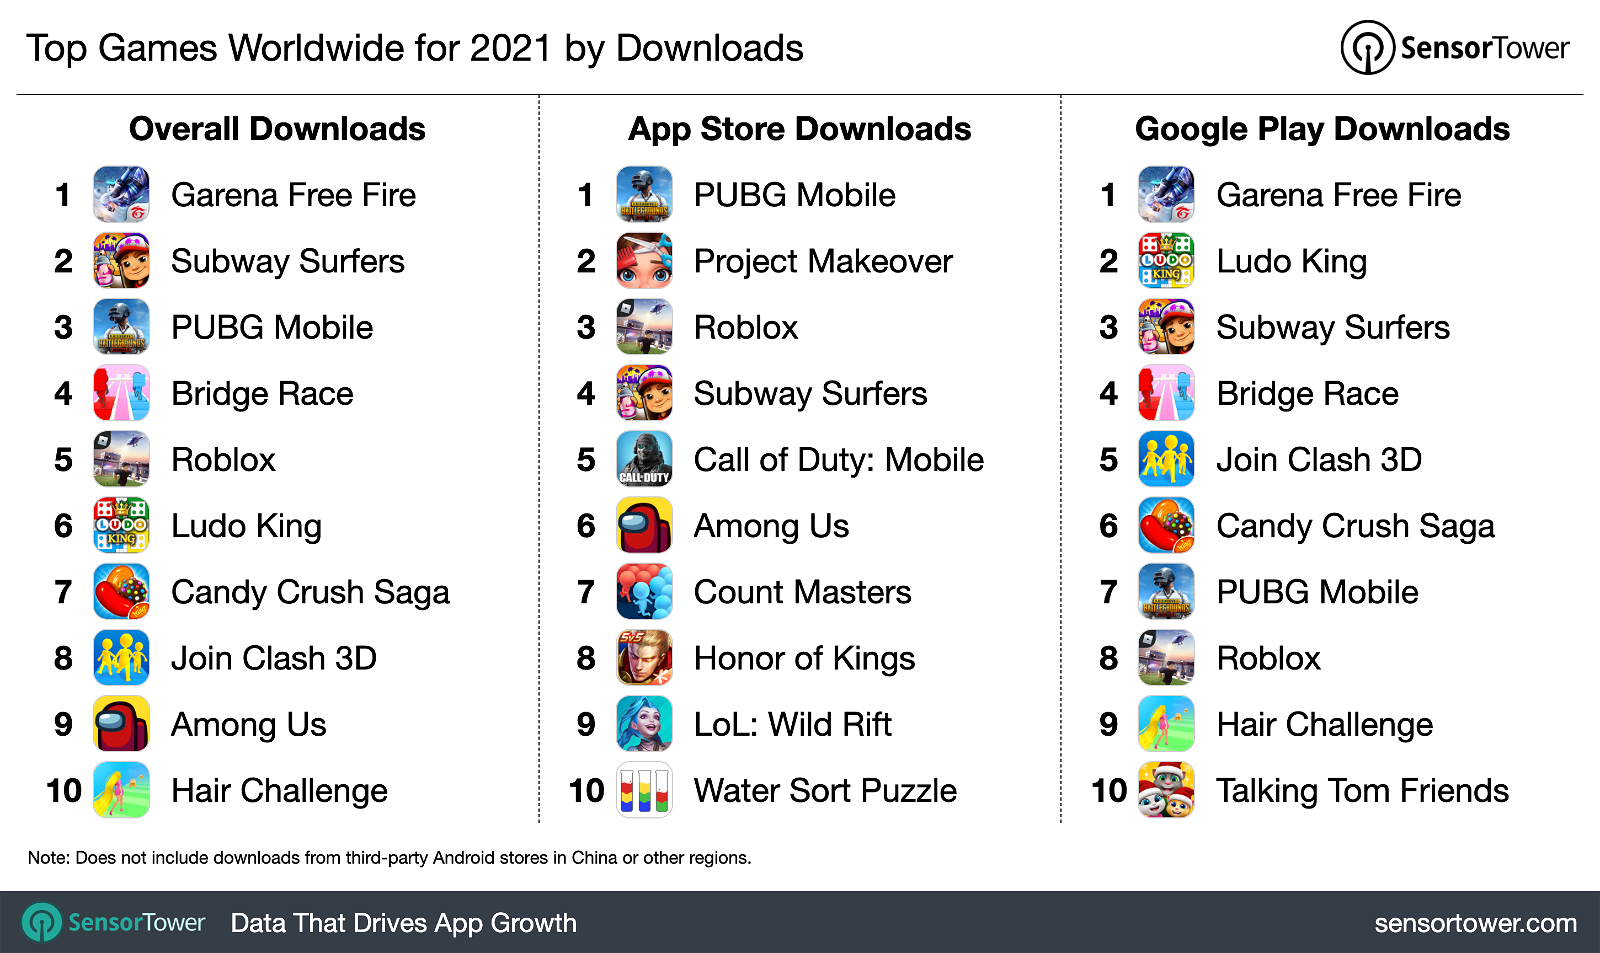 10 most downloaded games of 2021